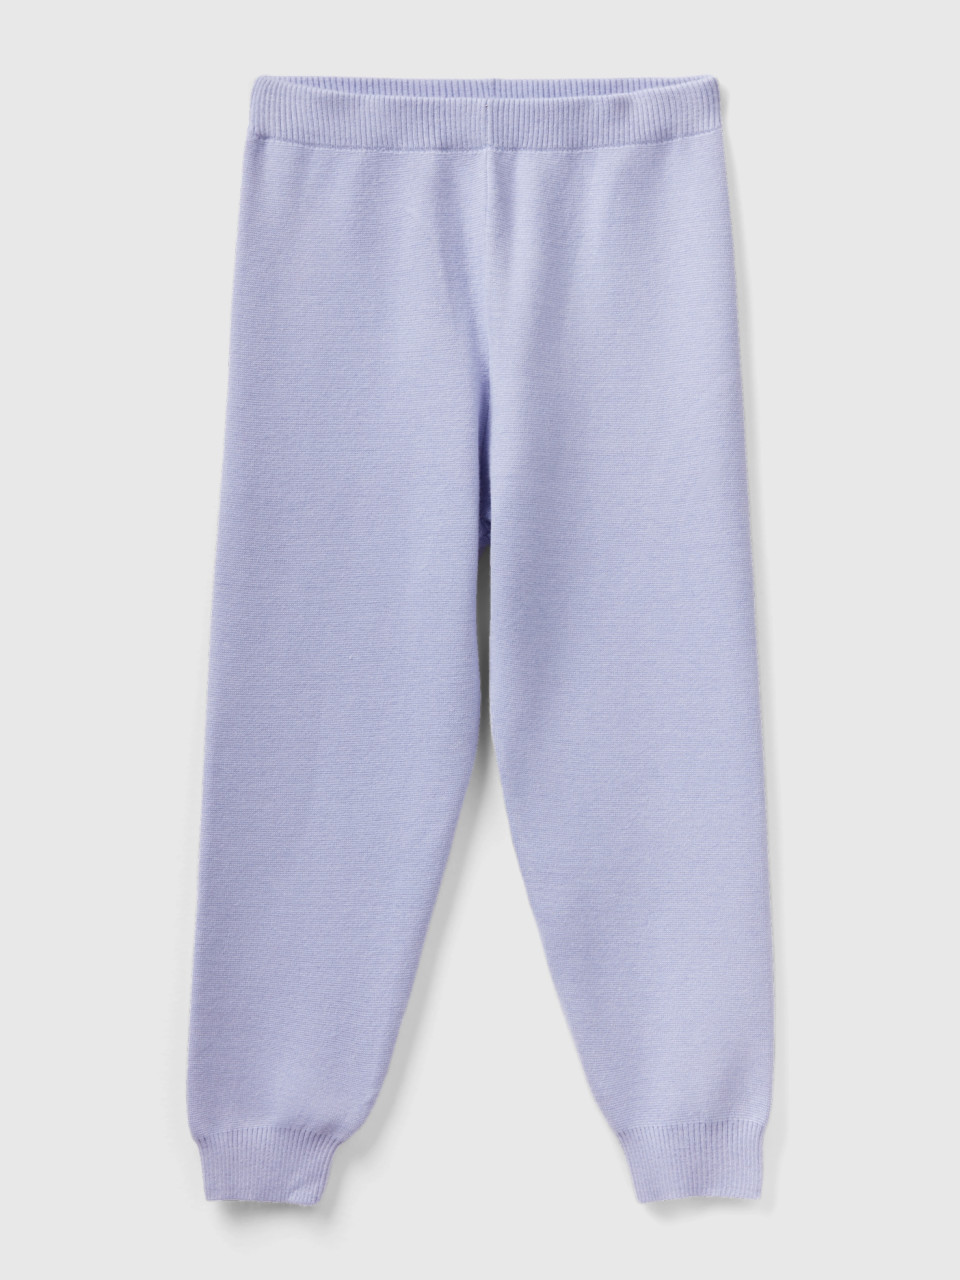 Benetton, Knit Trousers With Drawstring, Lilac, Kids